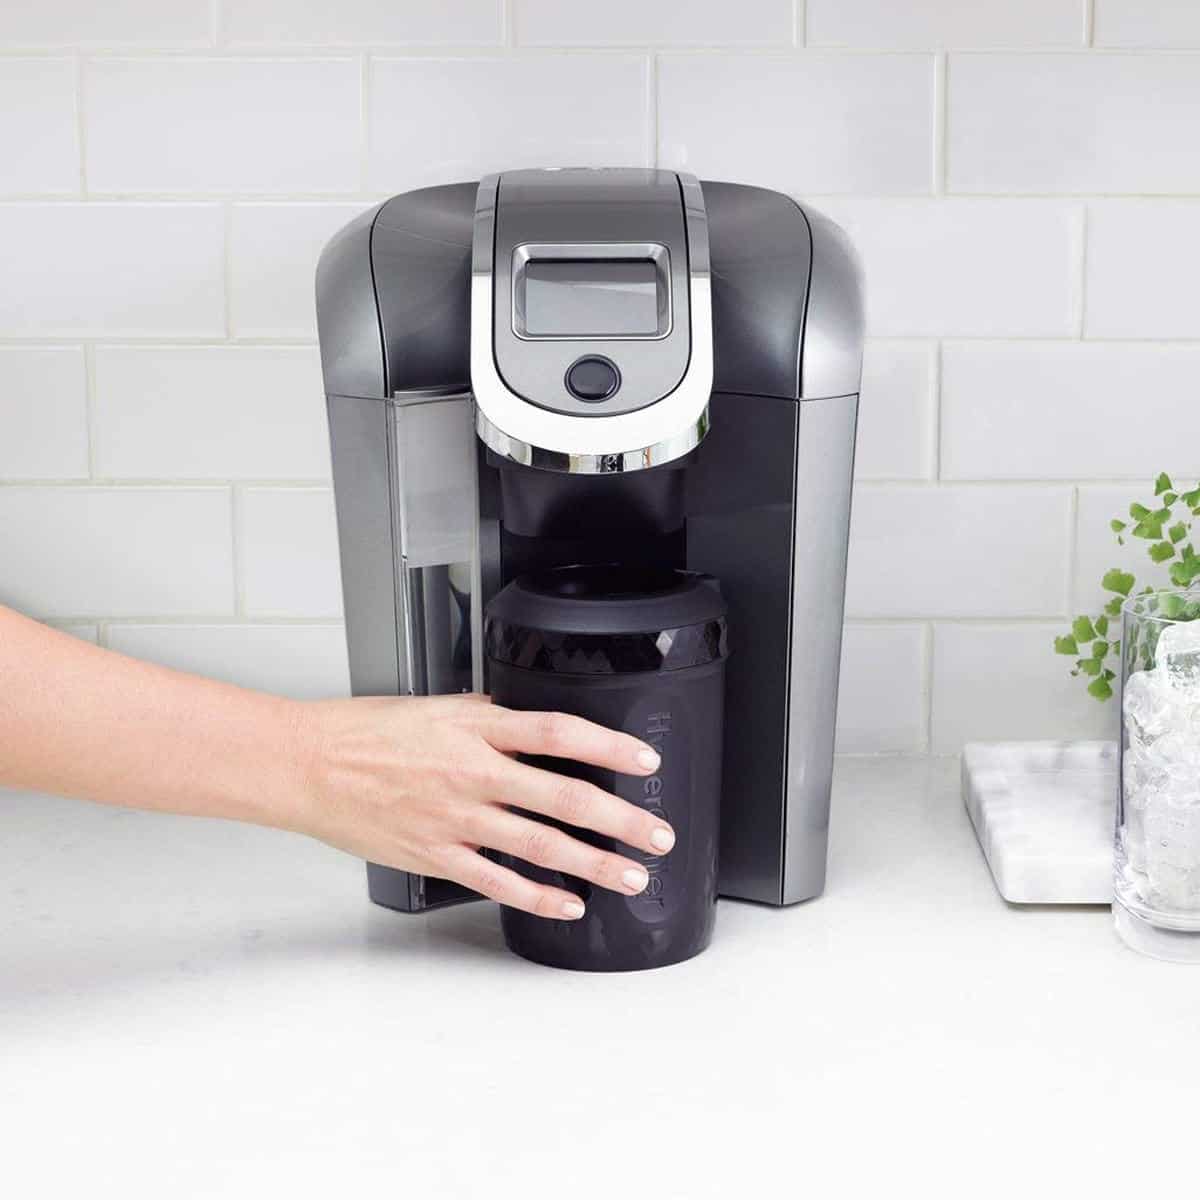 HyperChiller Iced Coffee Maker | Best Amazon Products You Never Knew You Needed